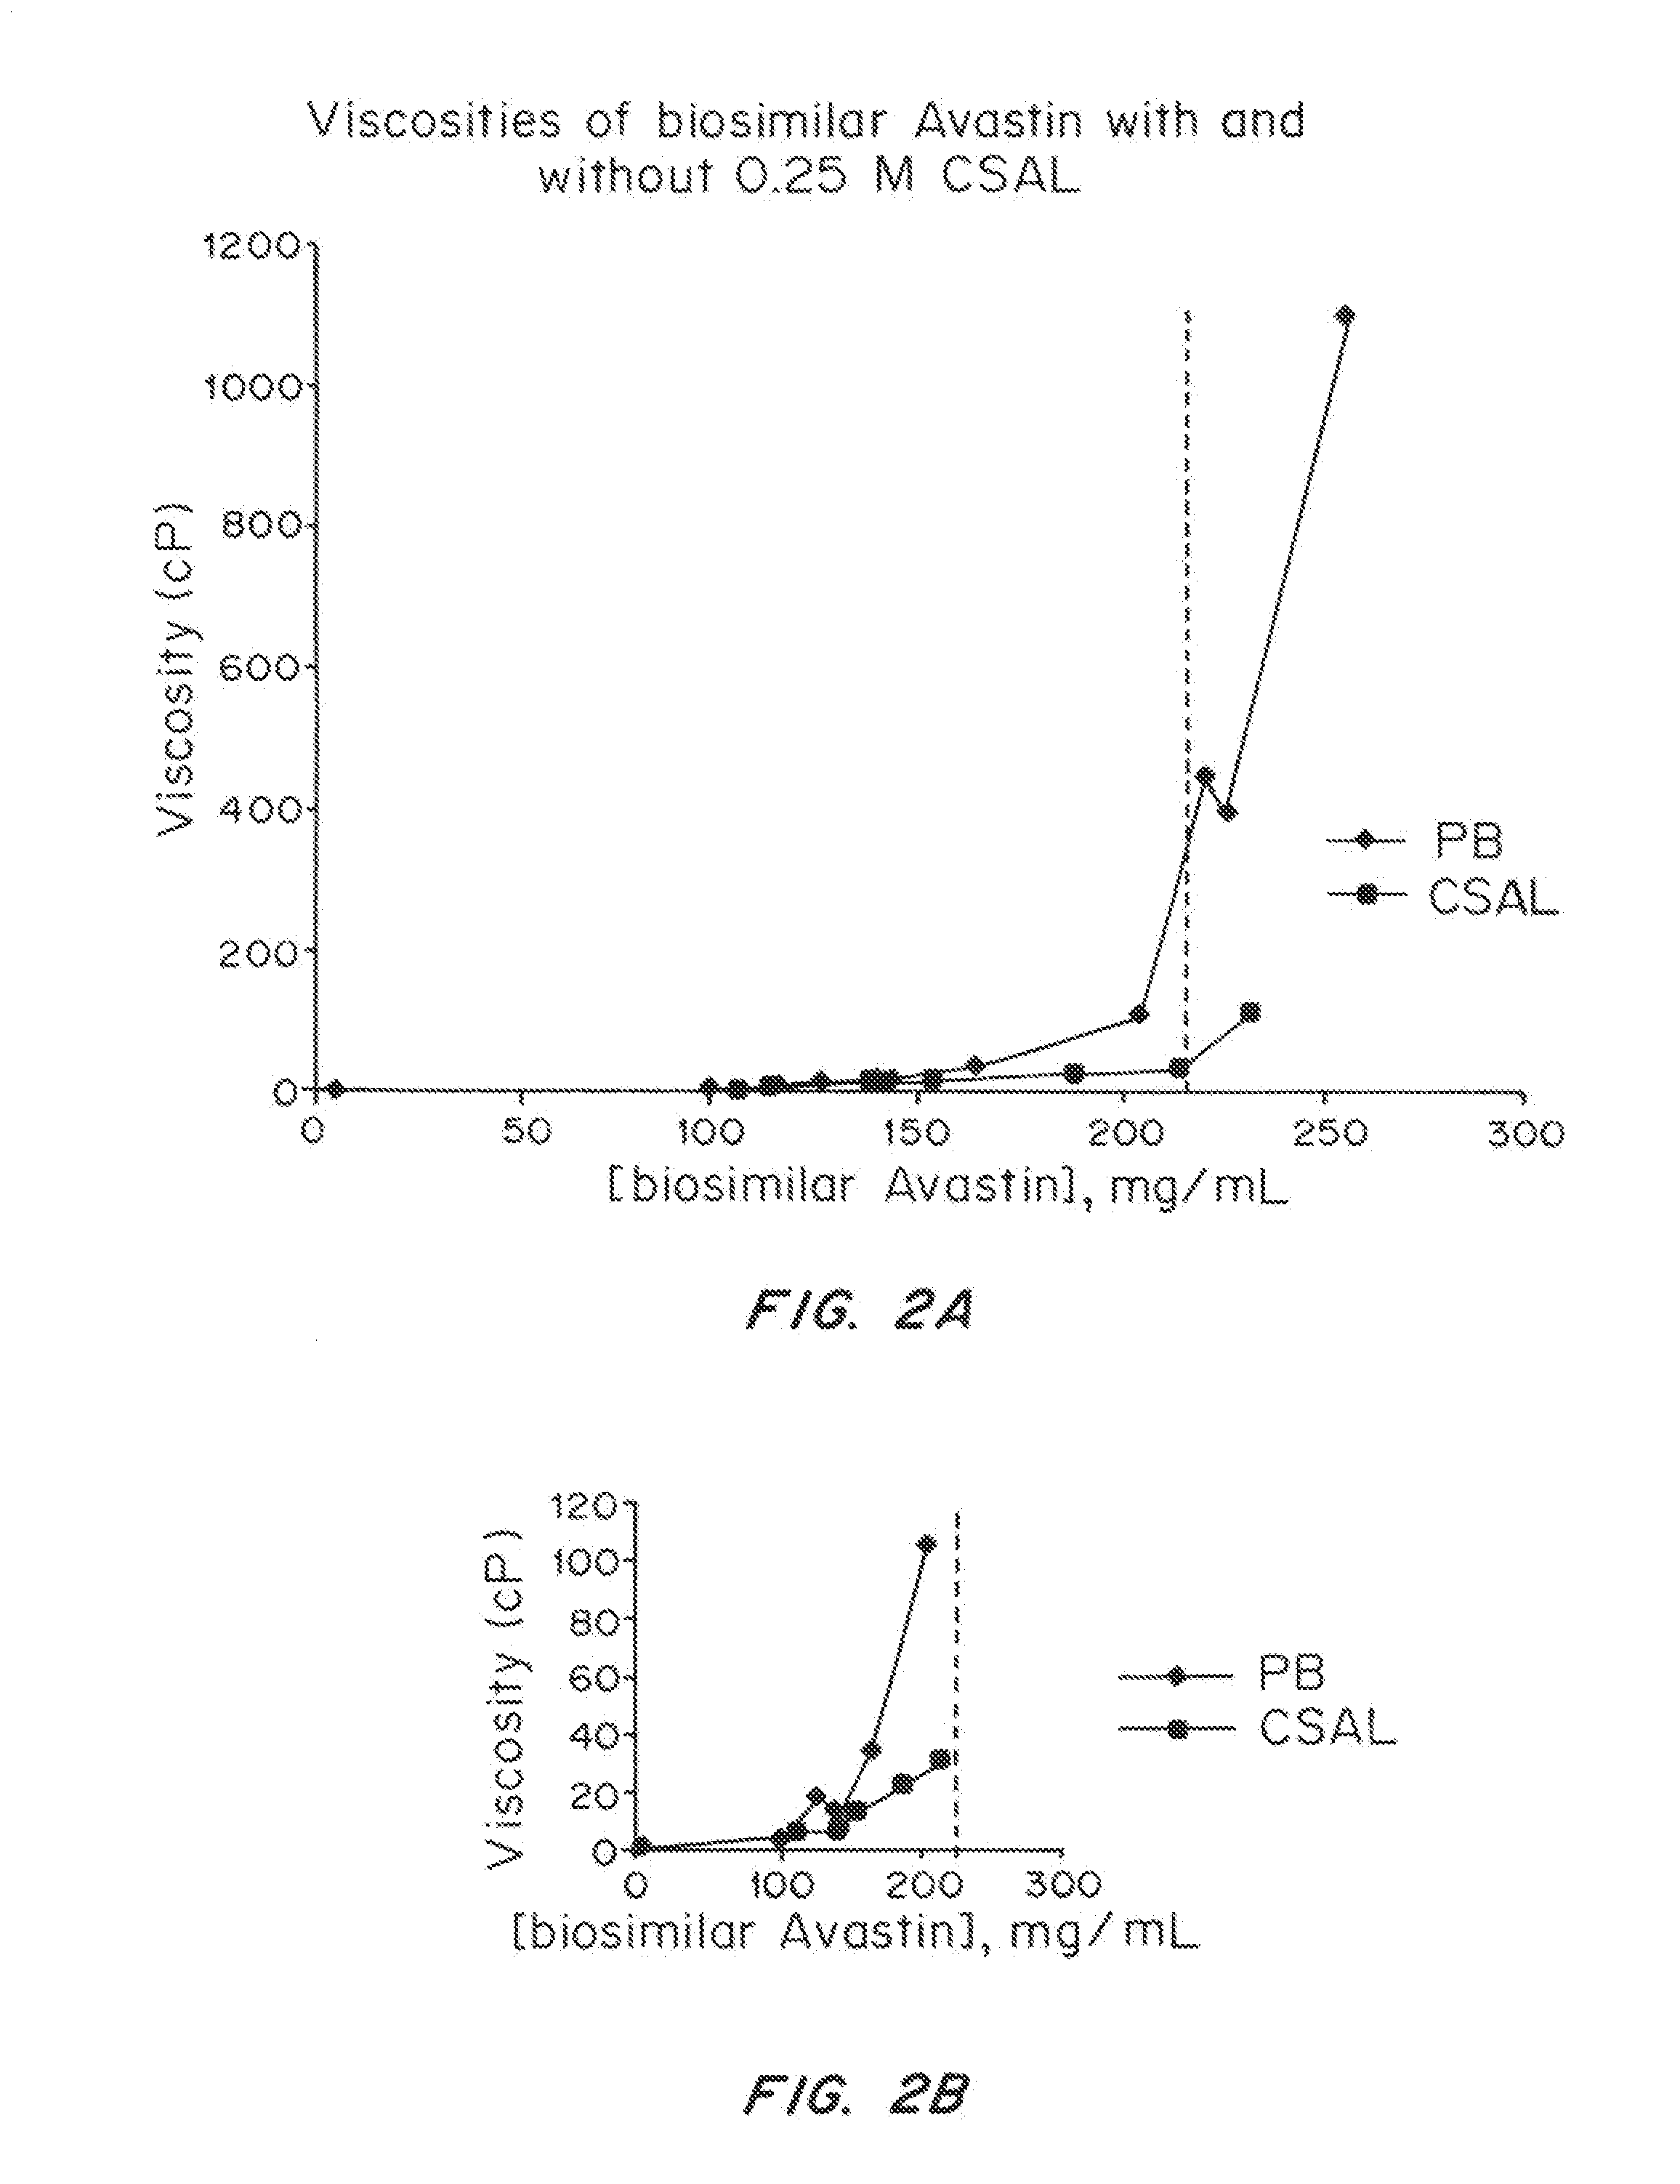 Liquid protein formulations containing viscosity-lowering agents